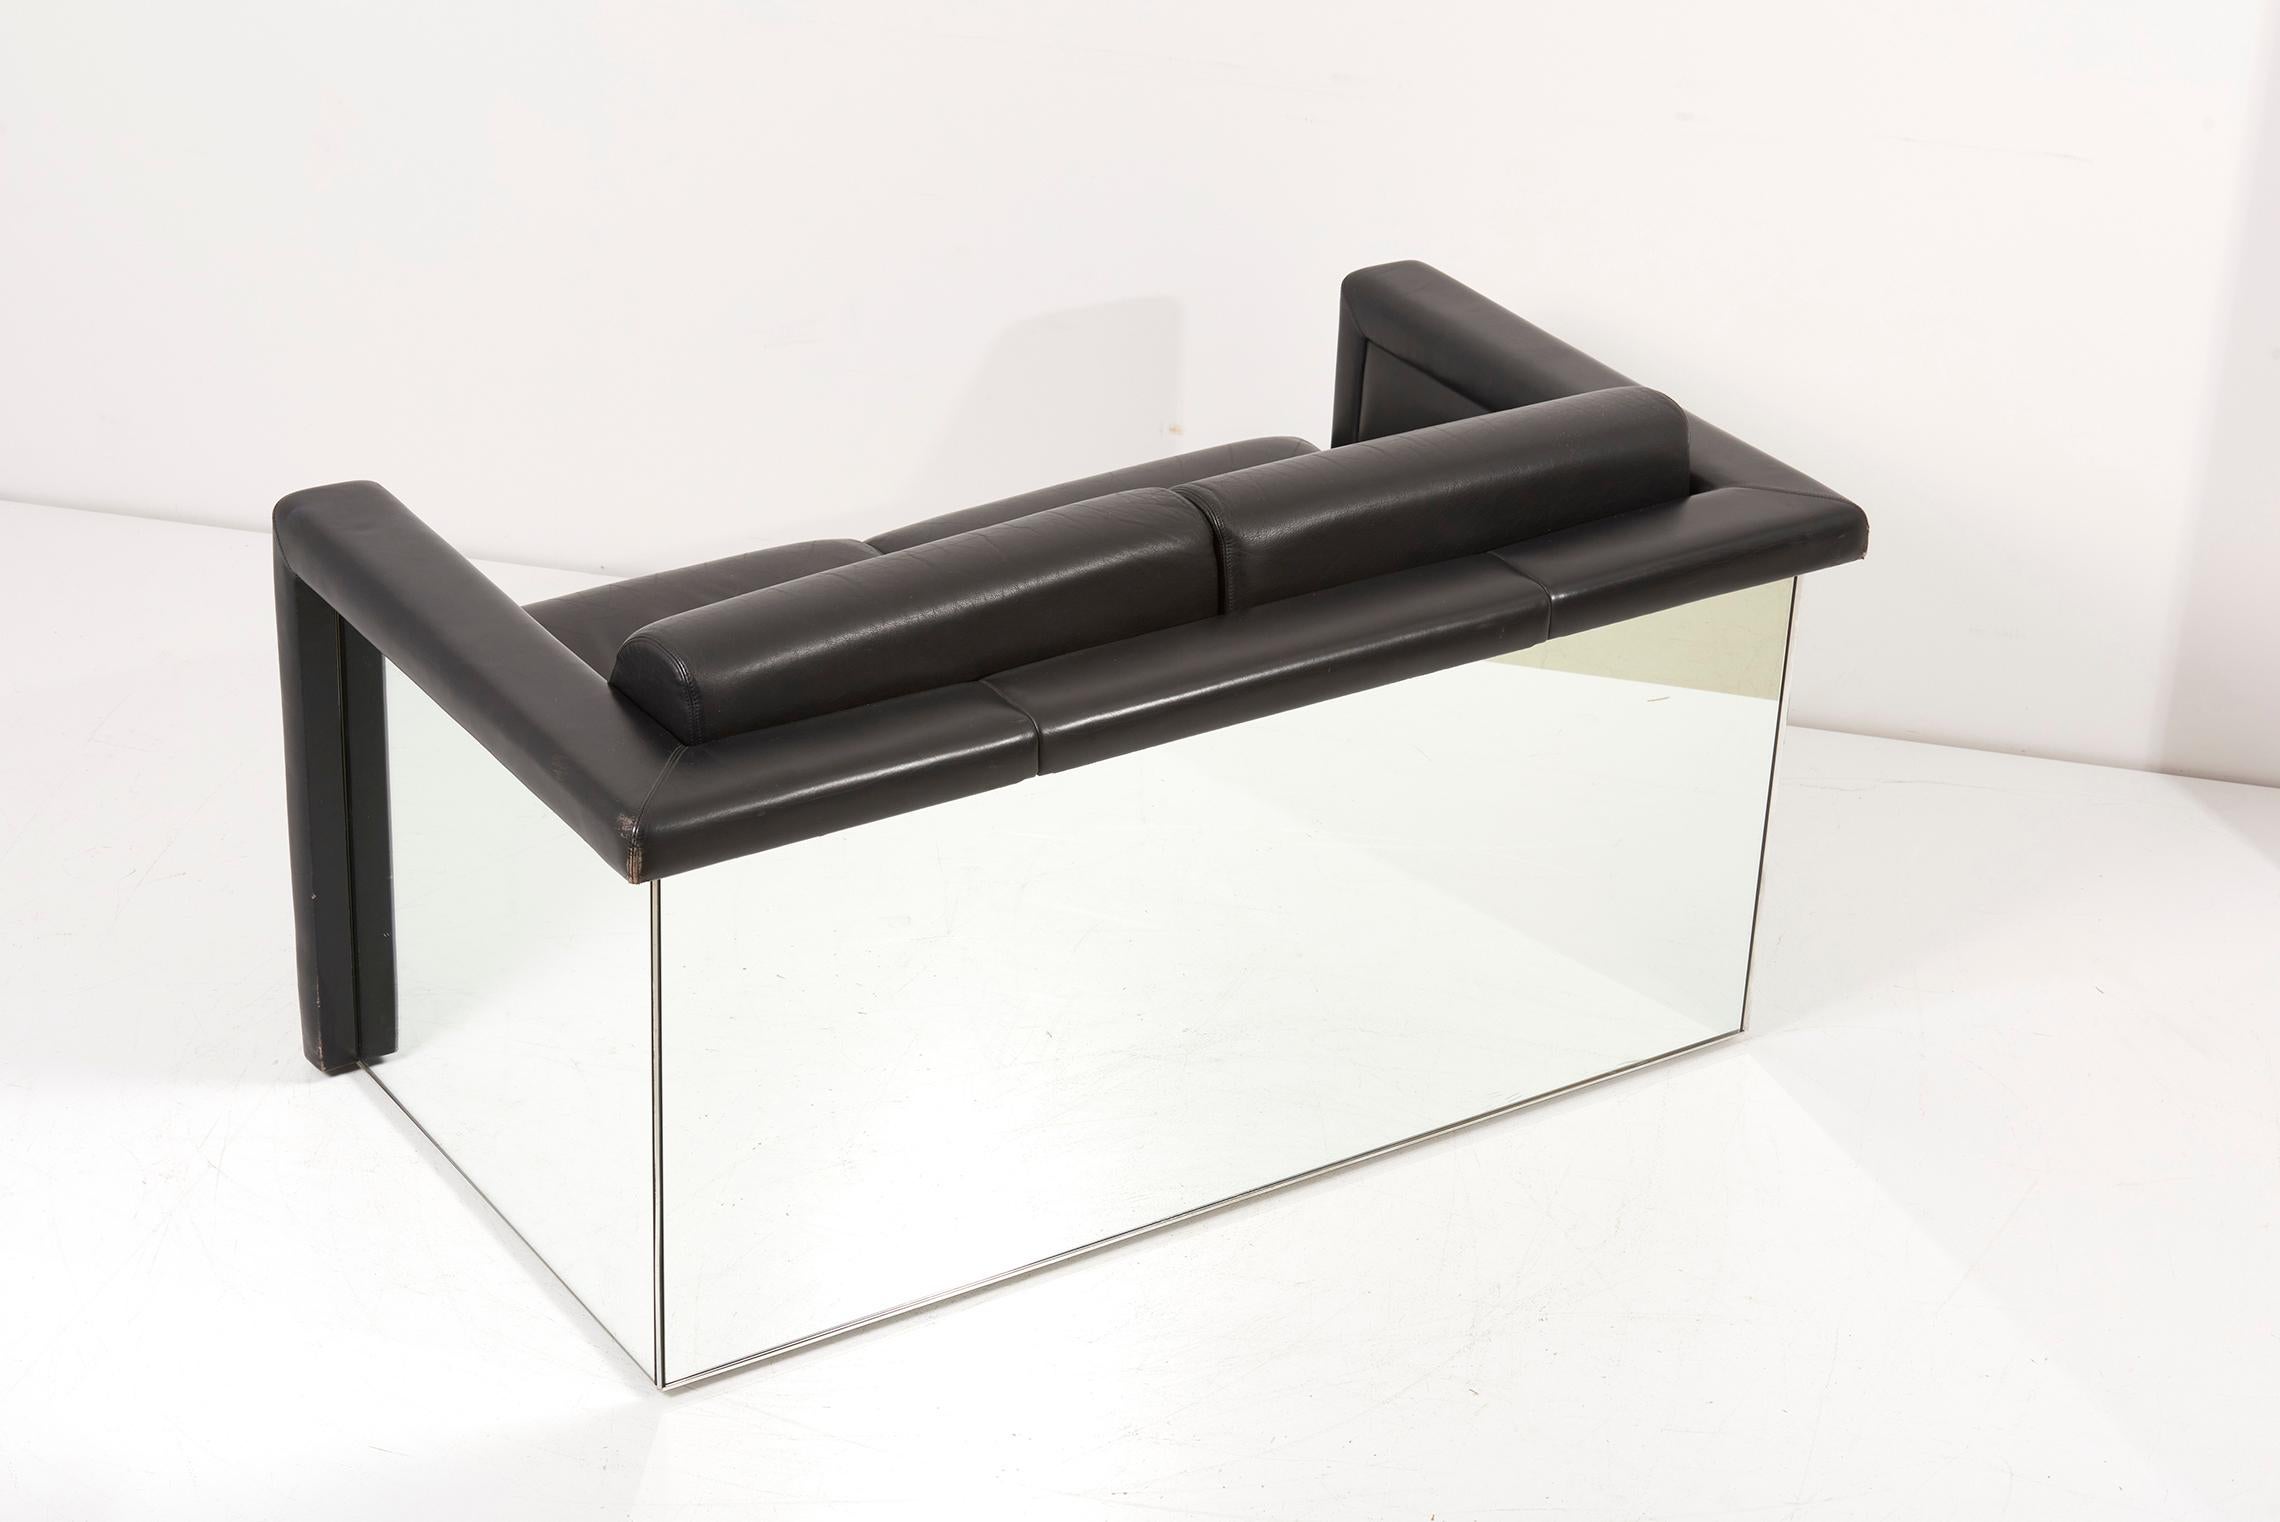 Pair of 1970s Trix & Robert Haussmann for Knoll 2-seat sofa settee. This pair is made in black leather and mirror. All original collectors condition. The Mirror Sofa and Chairs is a furniture collection designed by German architect and designer,